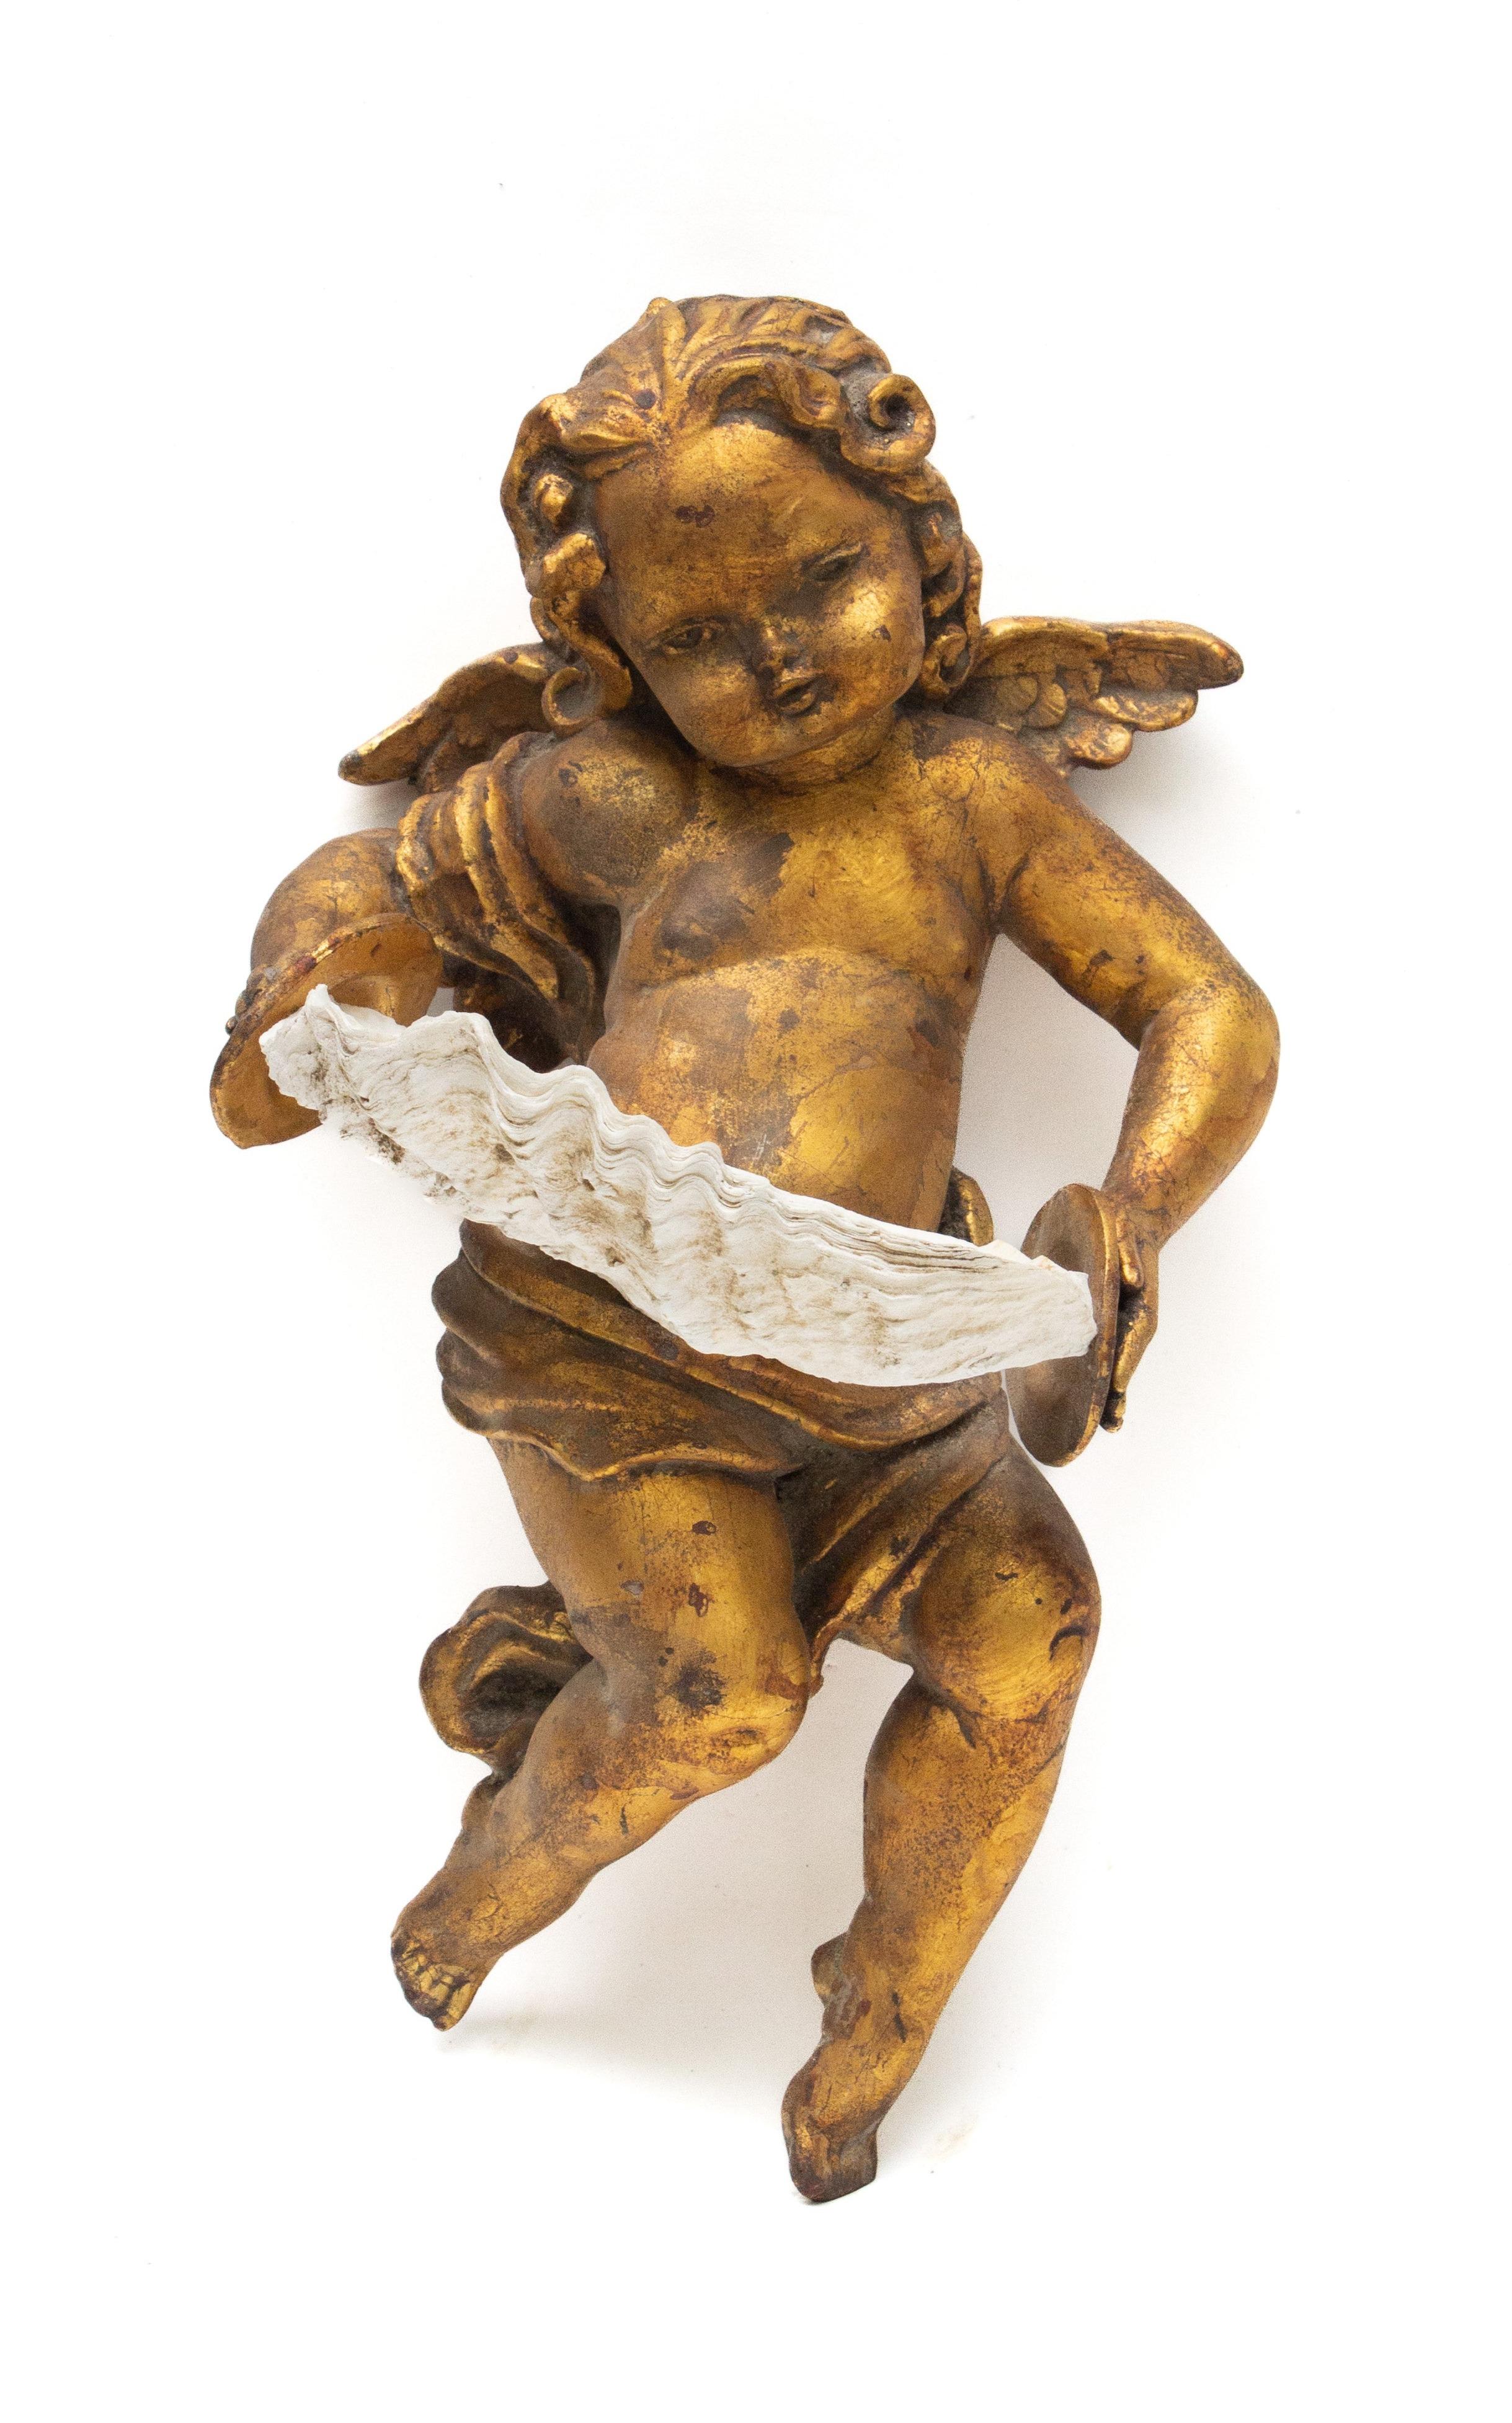 19th century Italian hand-carved gold leaf mecca angel holding a clam shell and adorned with baroque pearls.

Angels and cherub figures frequently appear in both mythological and religious paintings and sculptures, especially of the Renaissance and